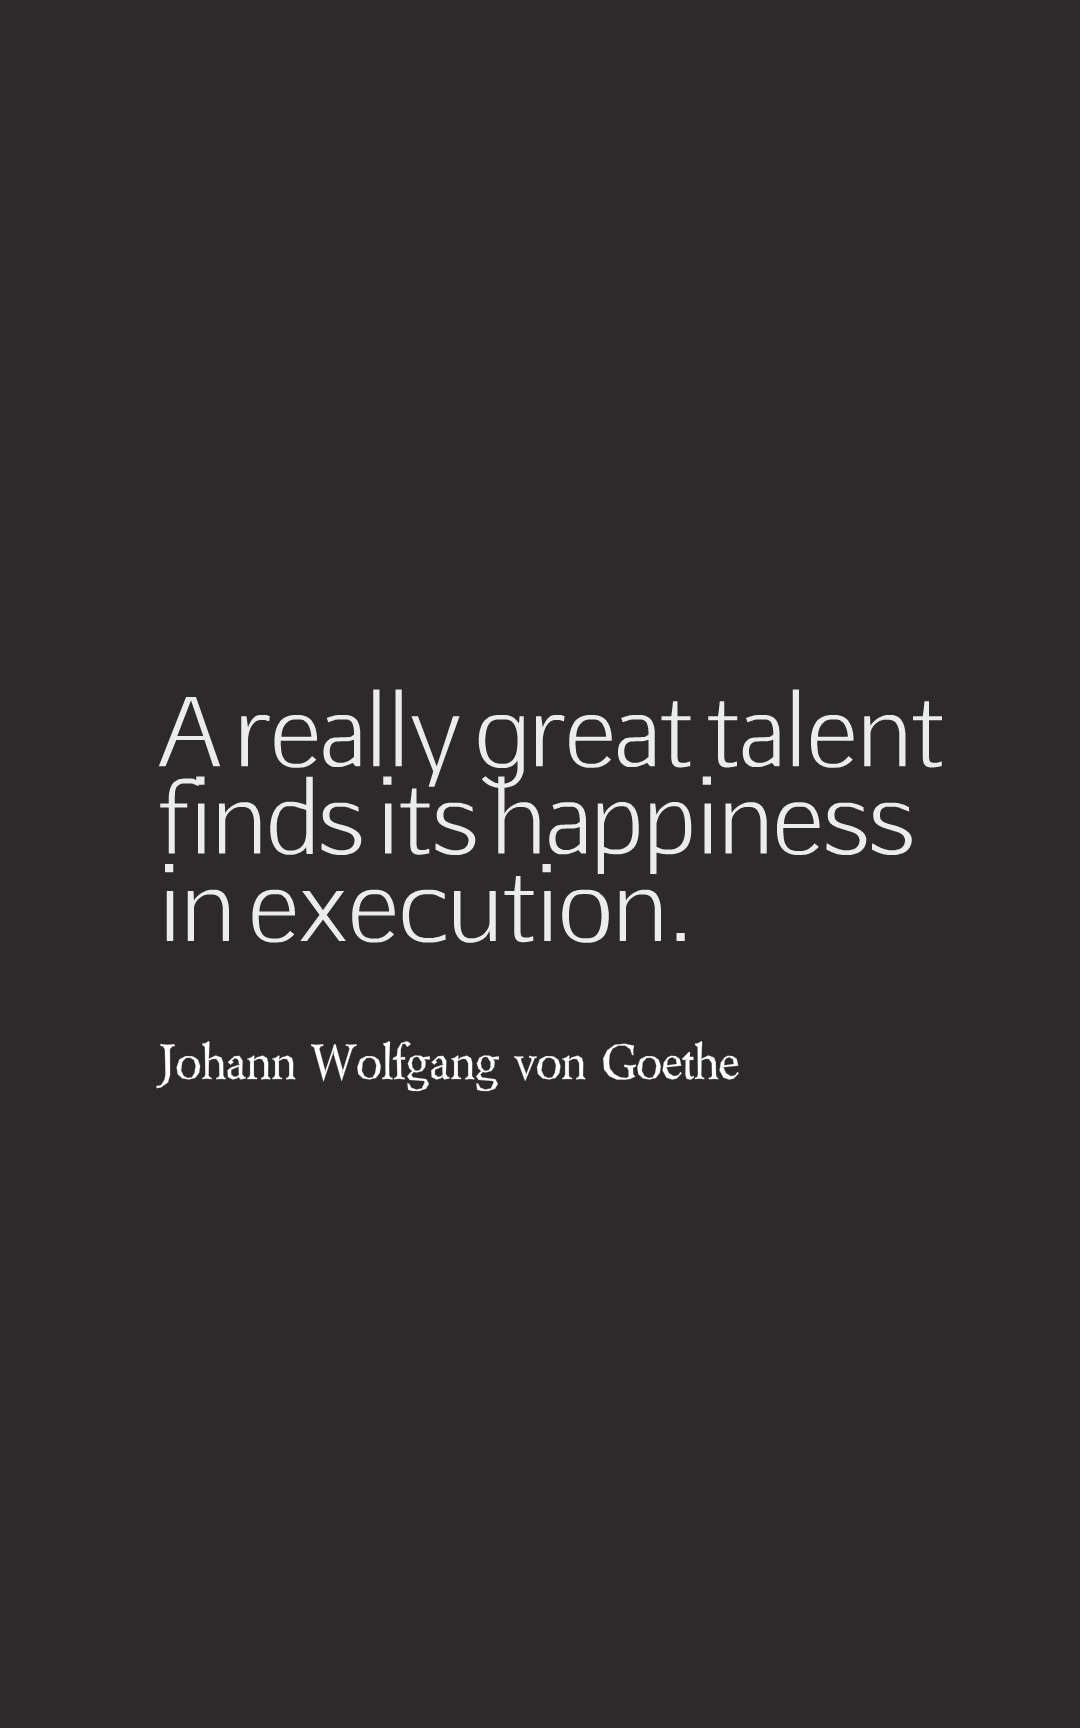 Talent Quotes And Sayings